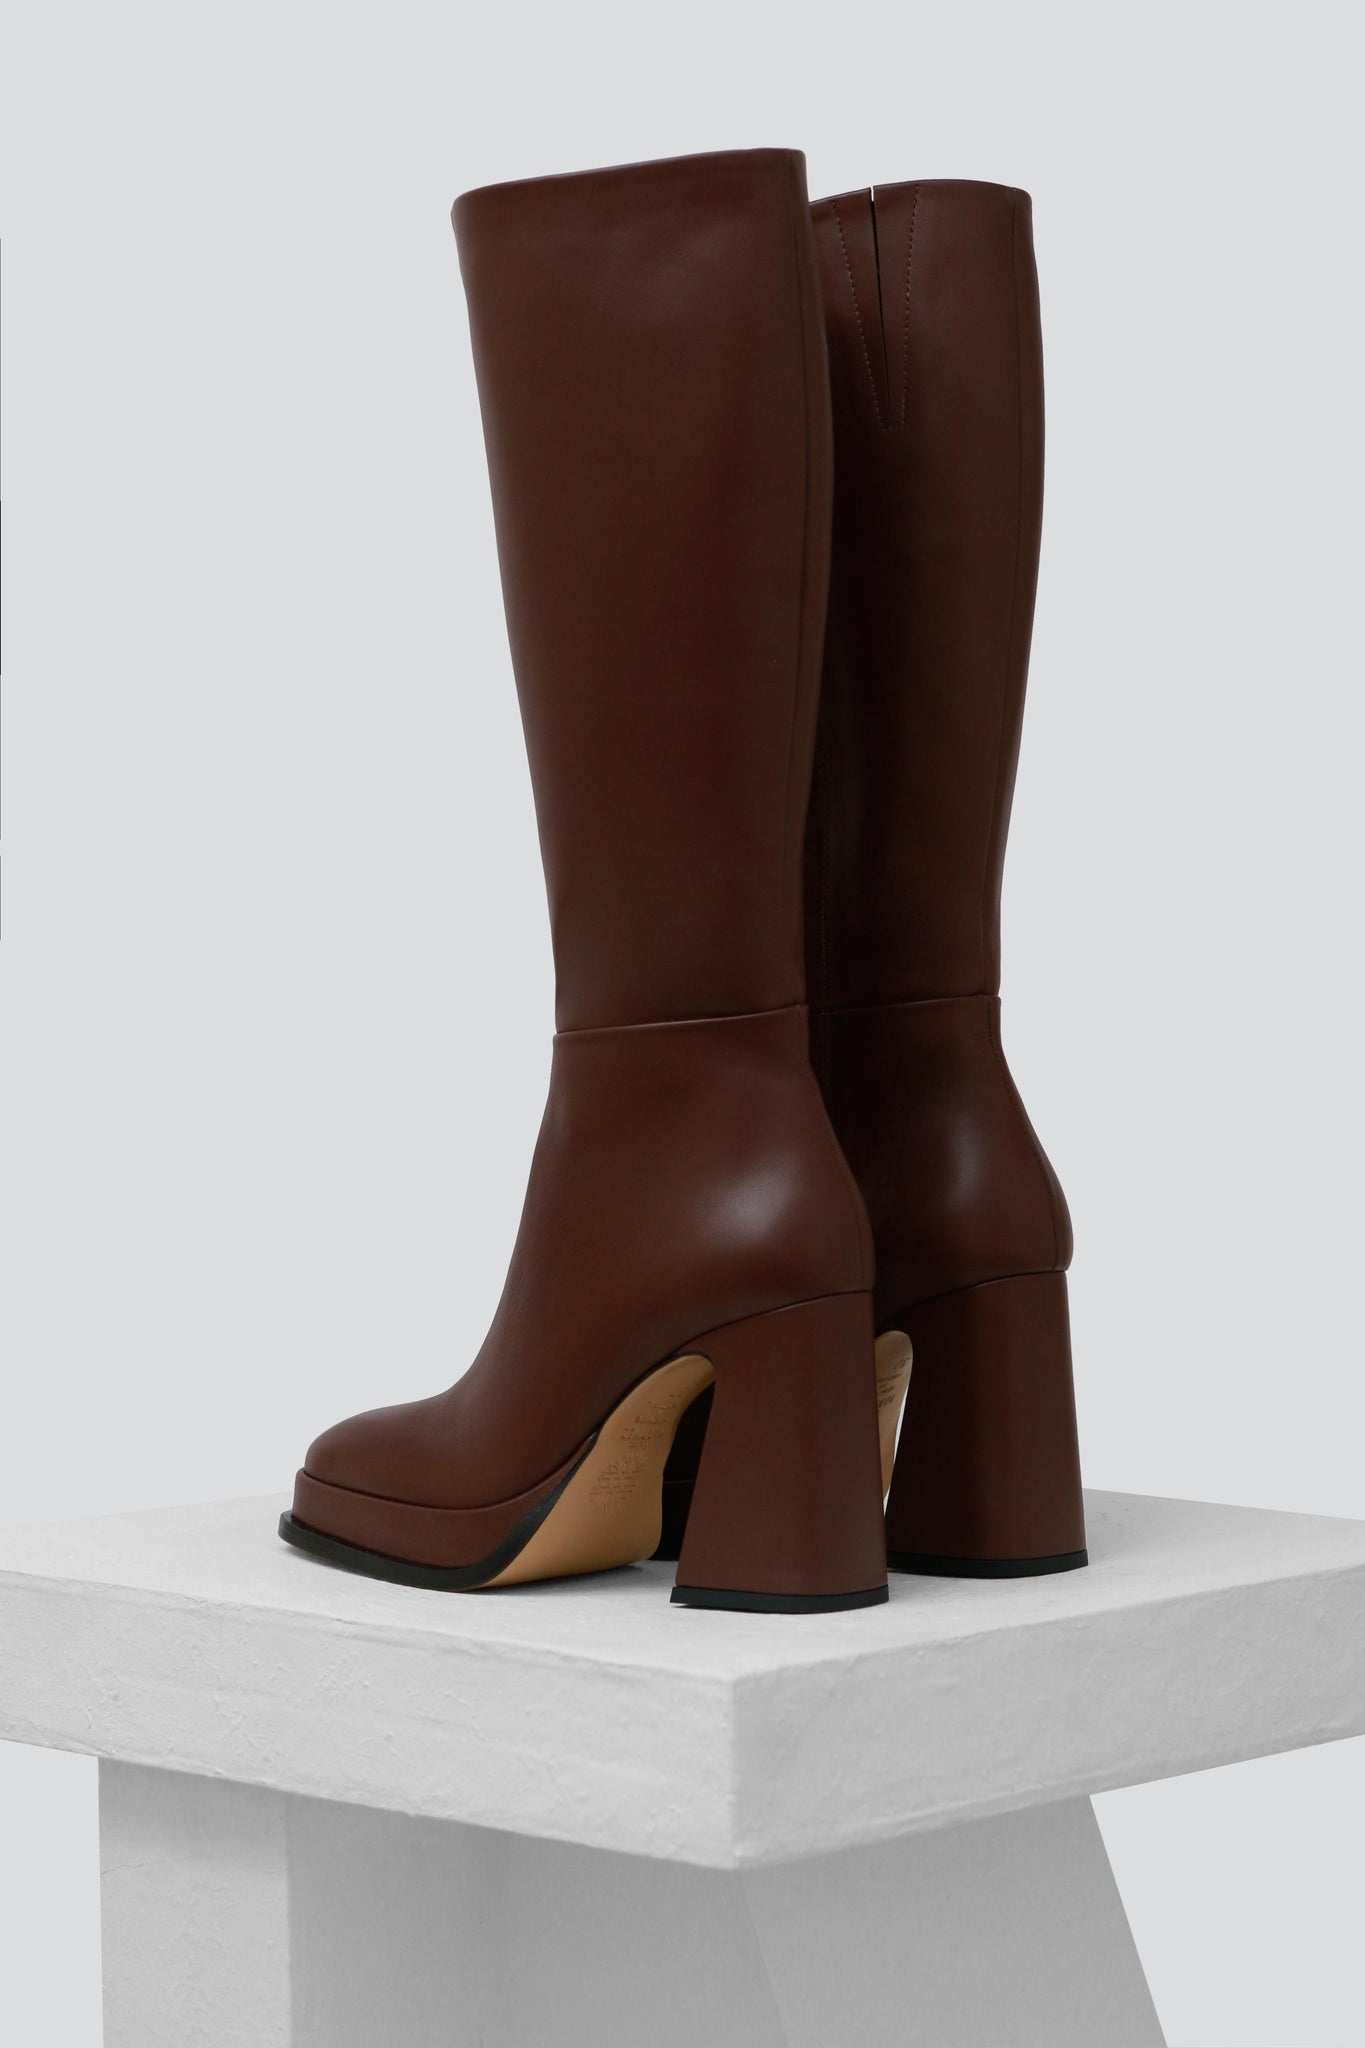 Souliers Martinez Shoes BEGONIA - Deep Chocolate Leather Platform Boots 